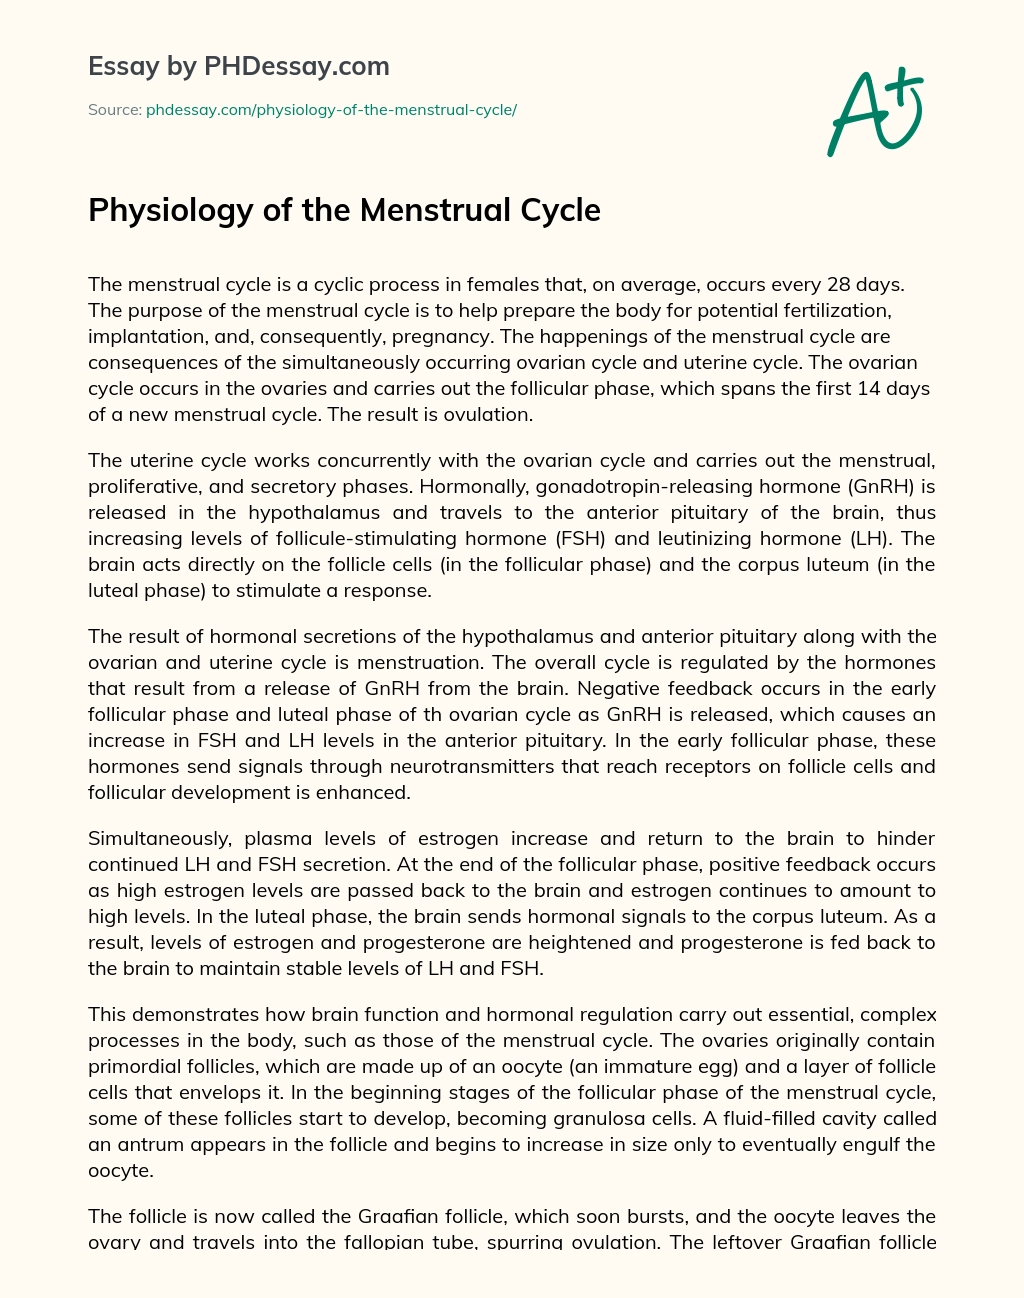 Physiology of the Menstrual Cycle essay